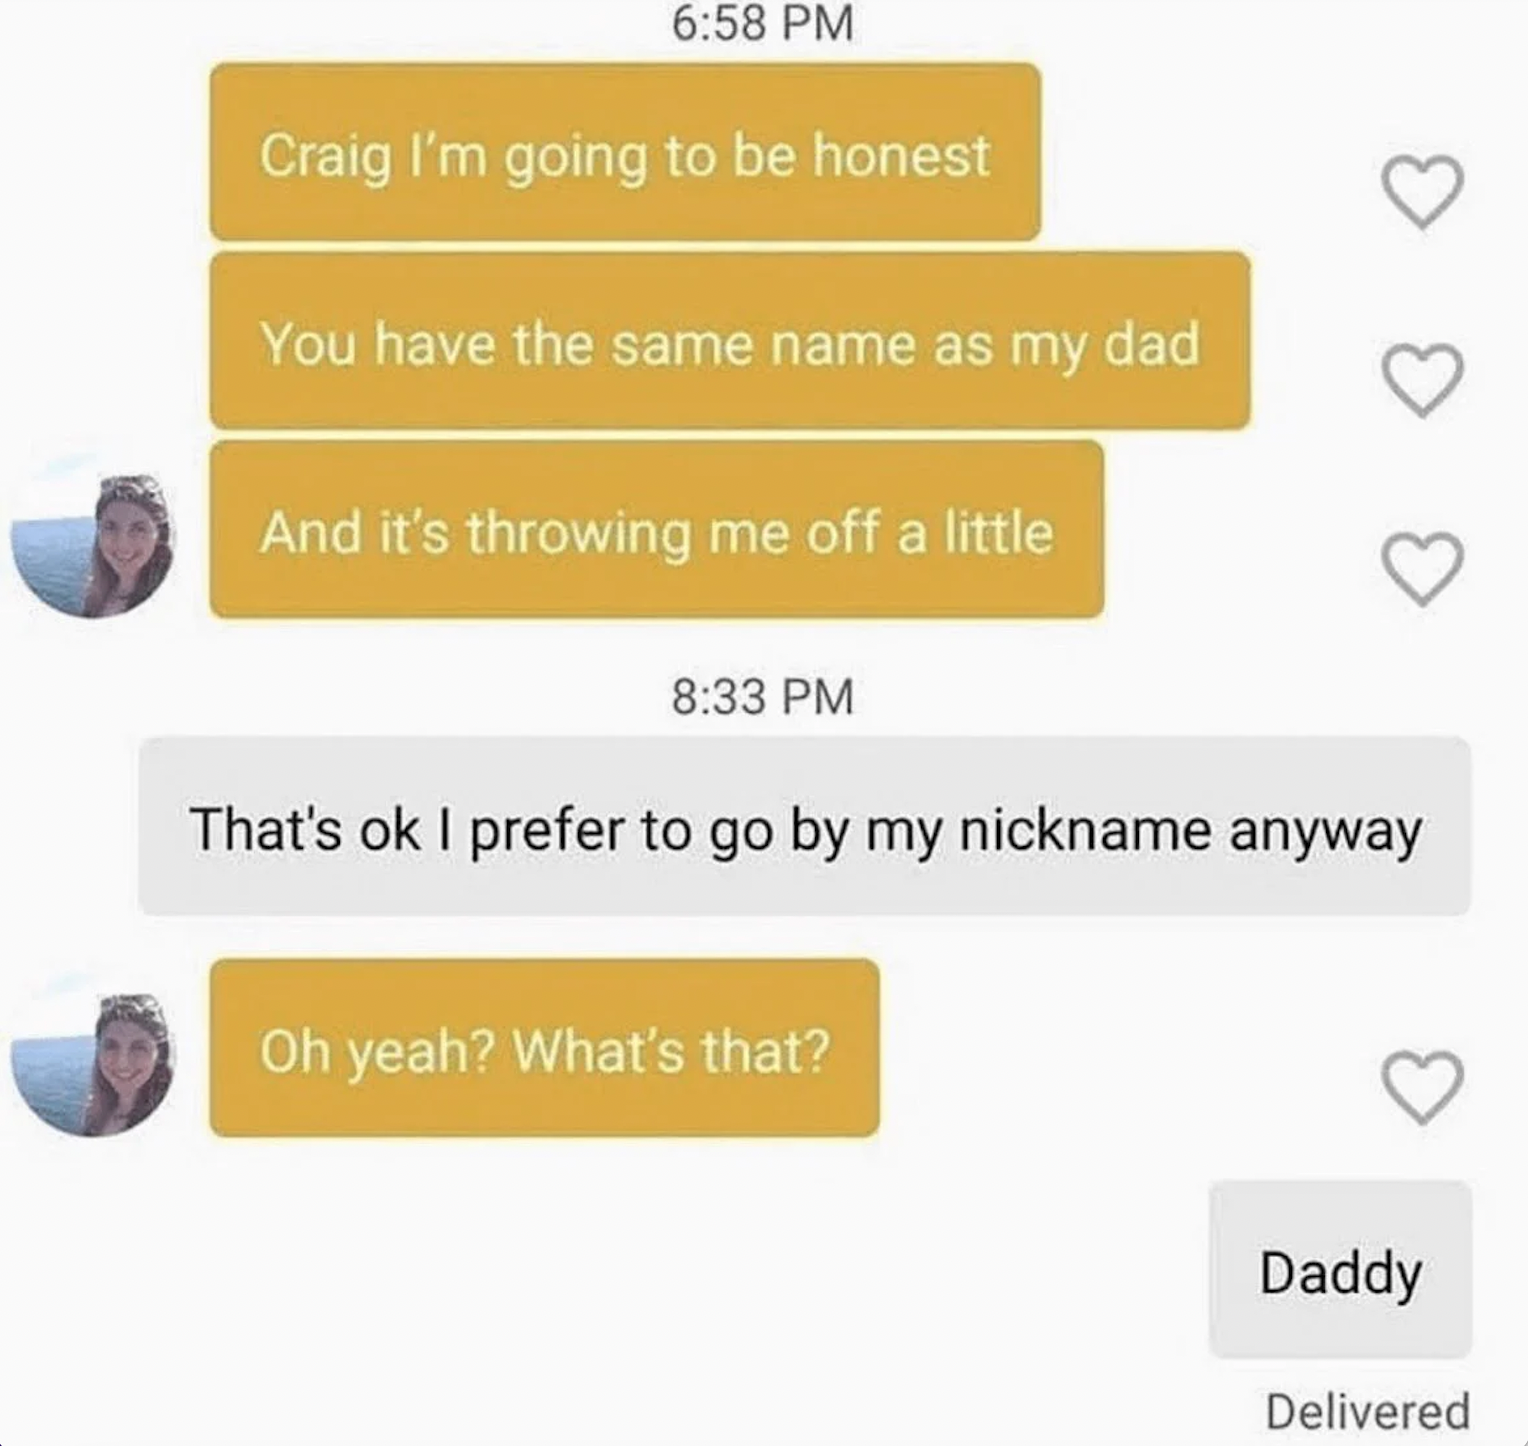 my dad is on bumble - Craig I'm going to be honest You have the same name as my dad And it's throwing me off a little That's ok I prefer to go by my nickname anyway Oh yeah? What's that? Daddy Delivered